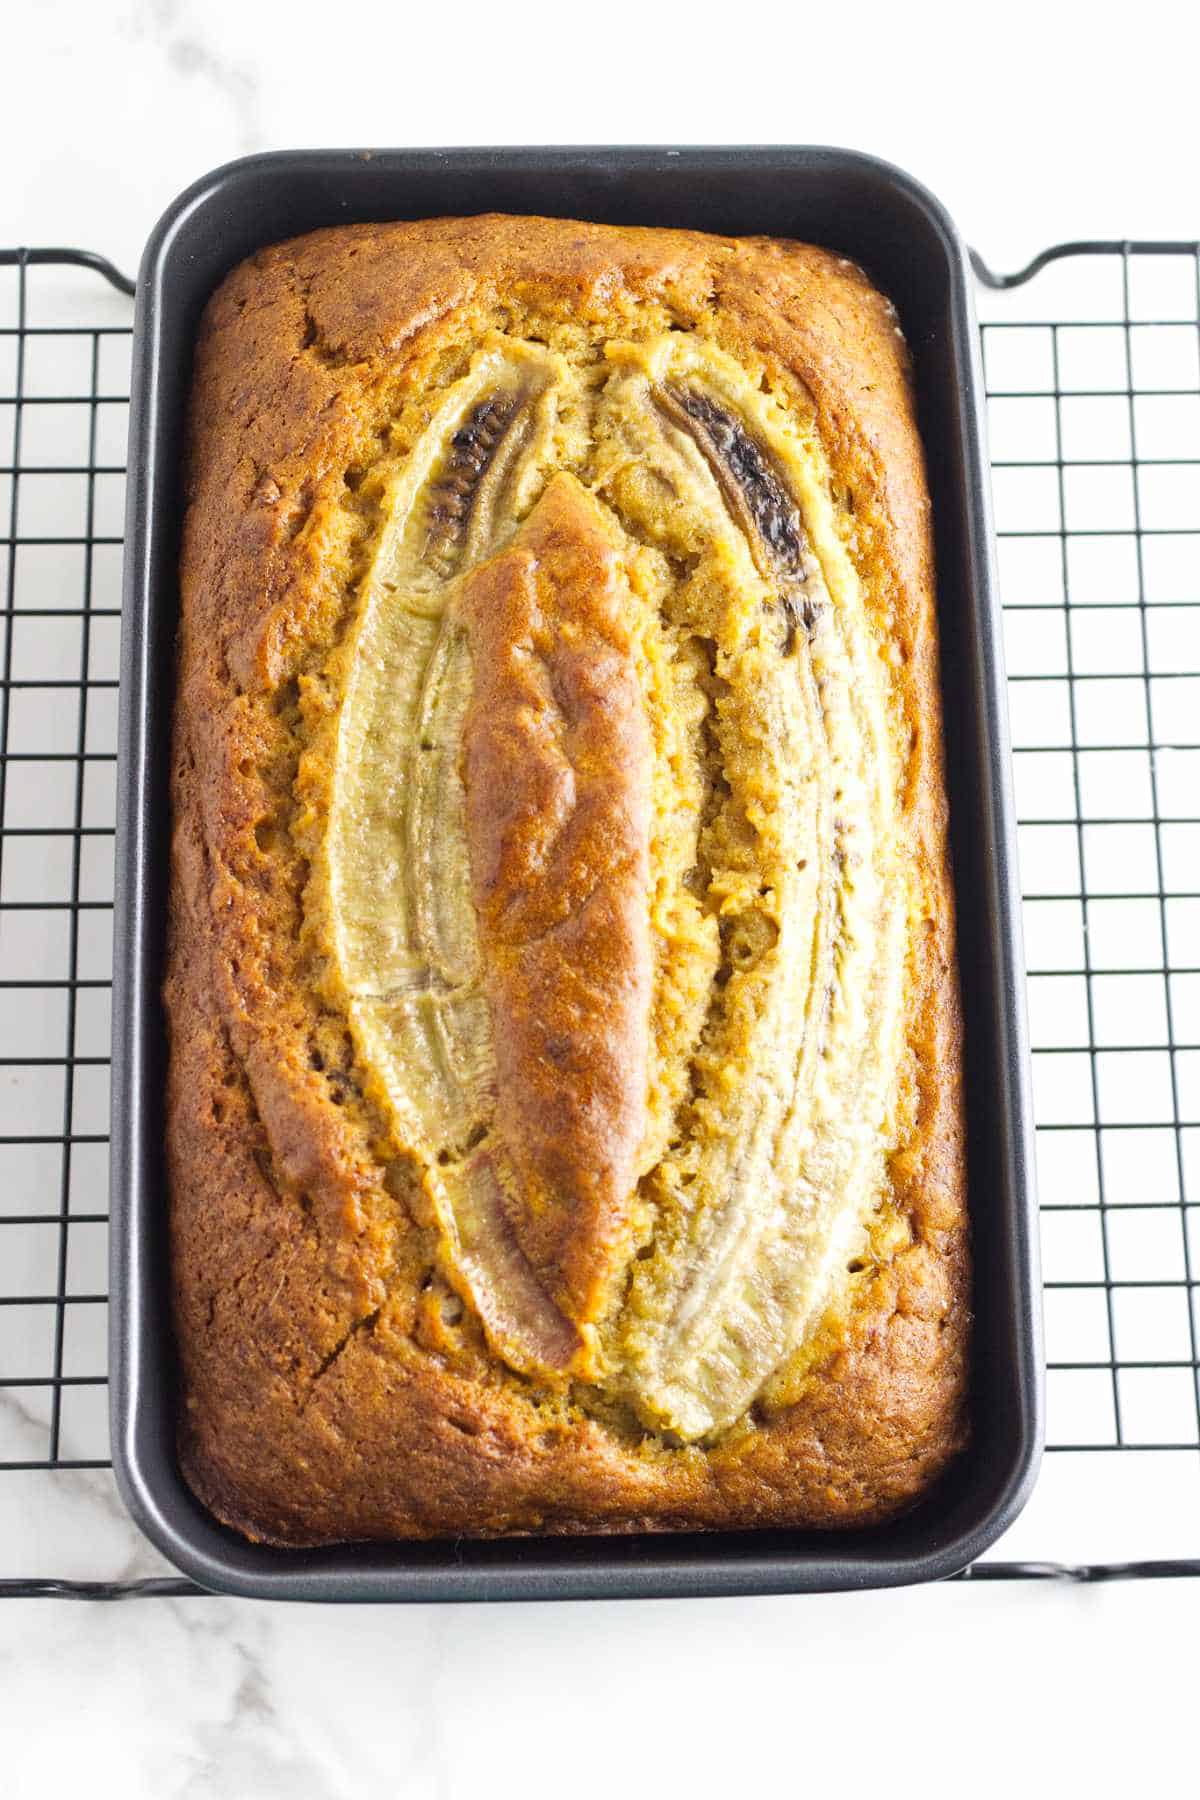 golden browned baked banana bread using self rising flour cooling on a rack.